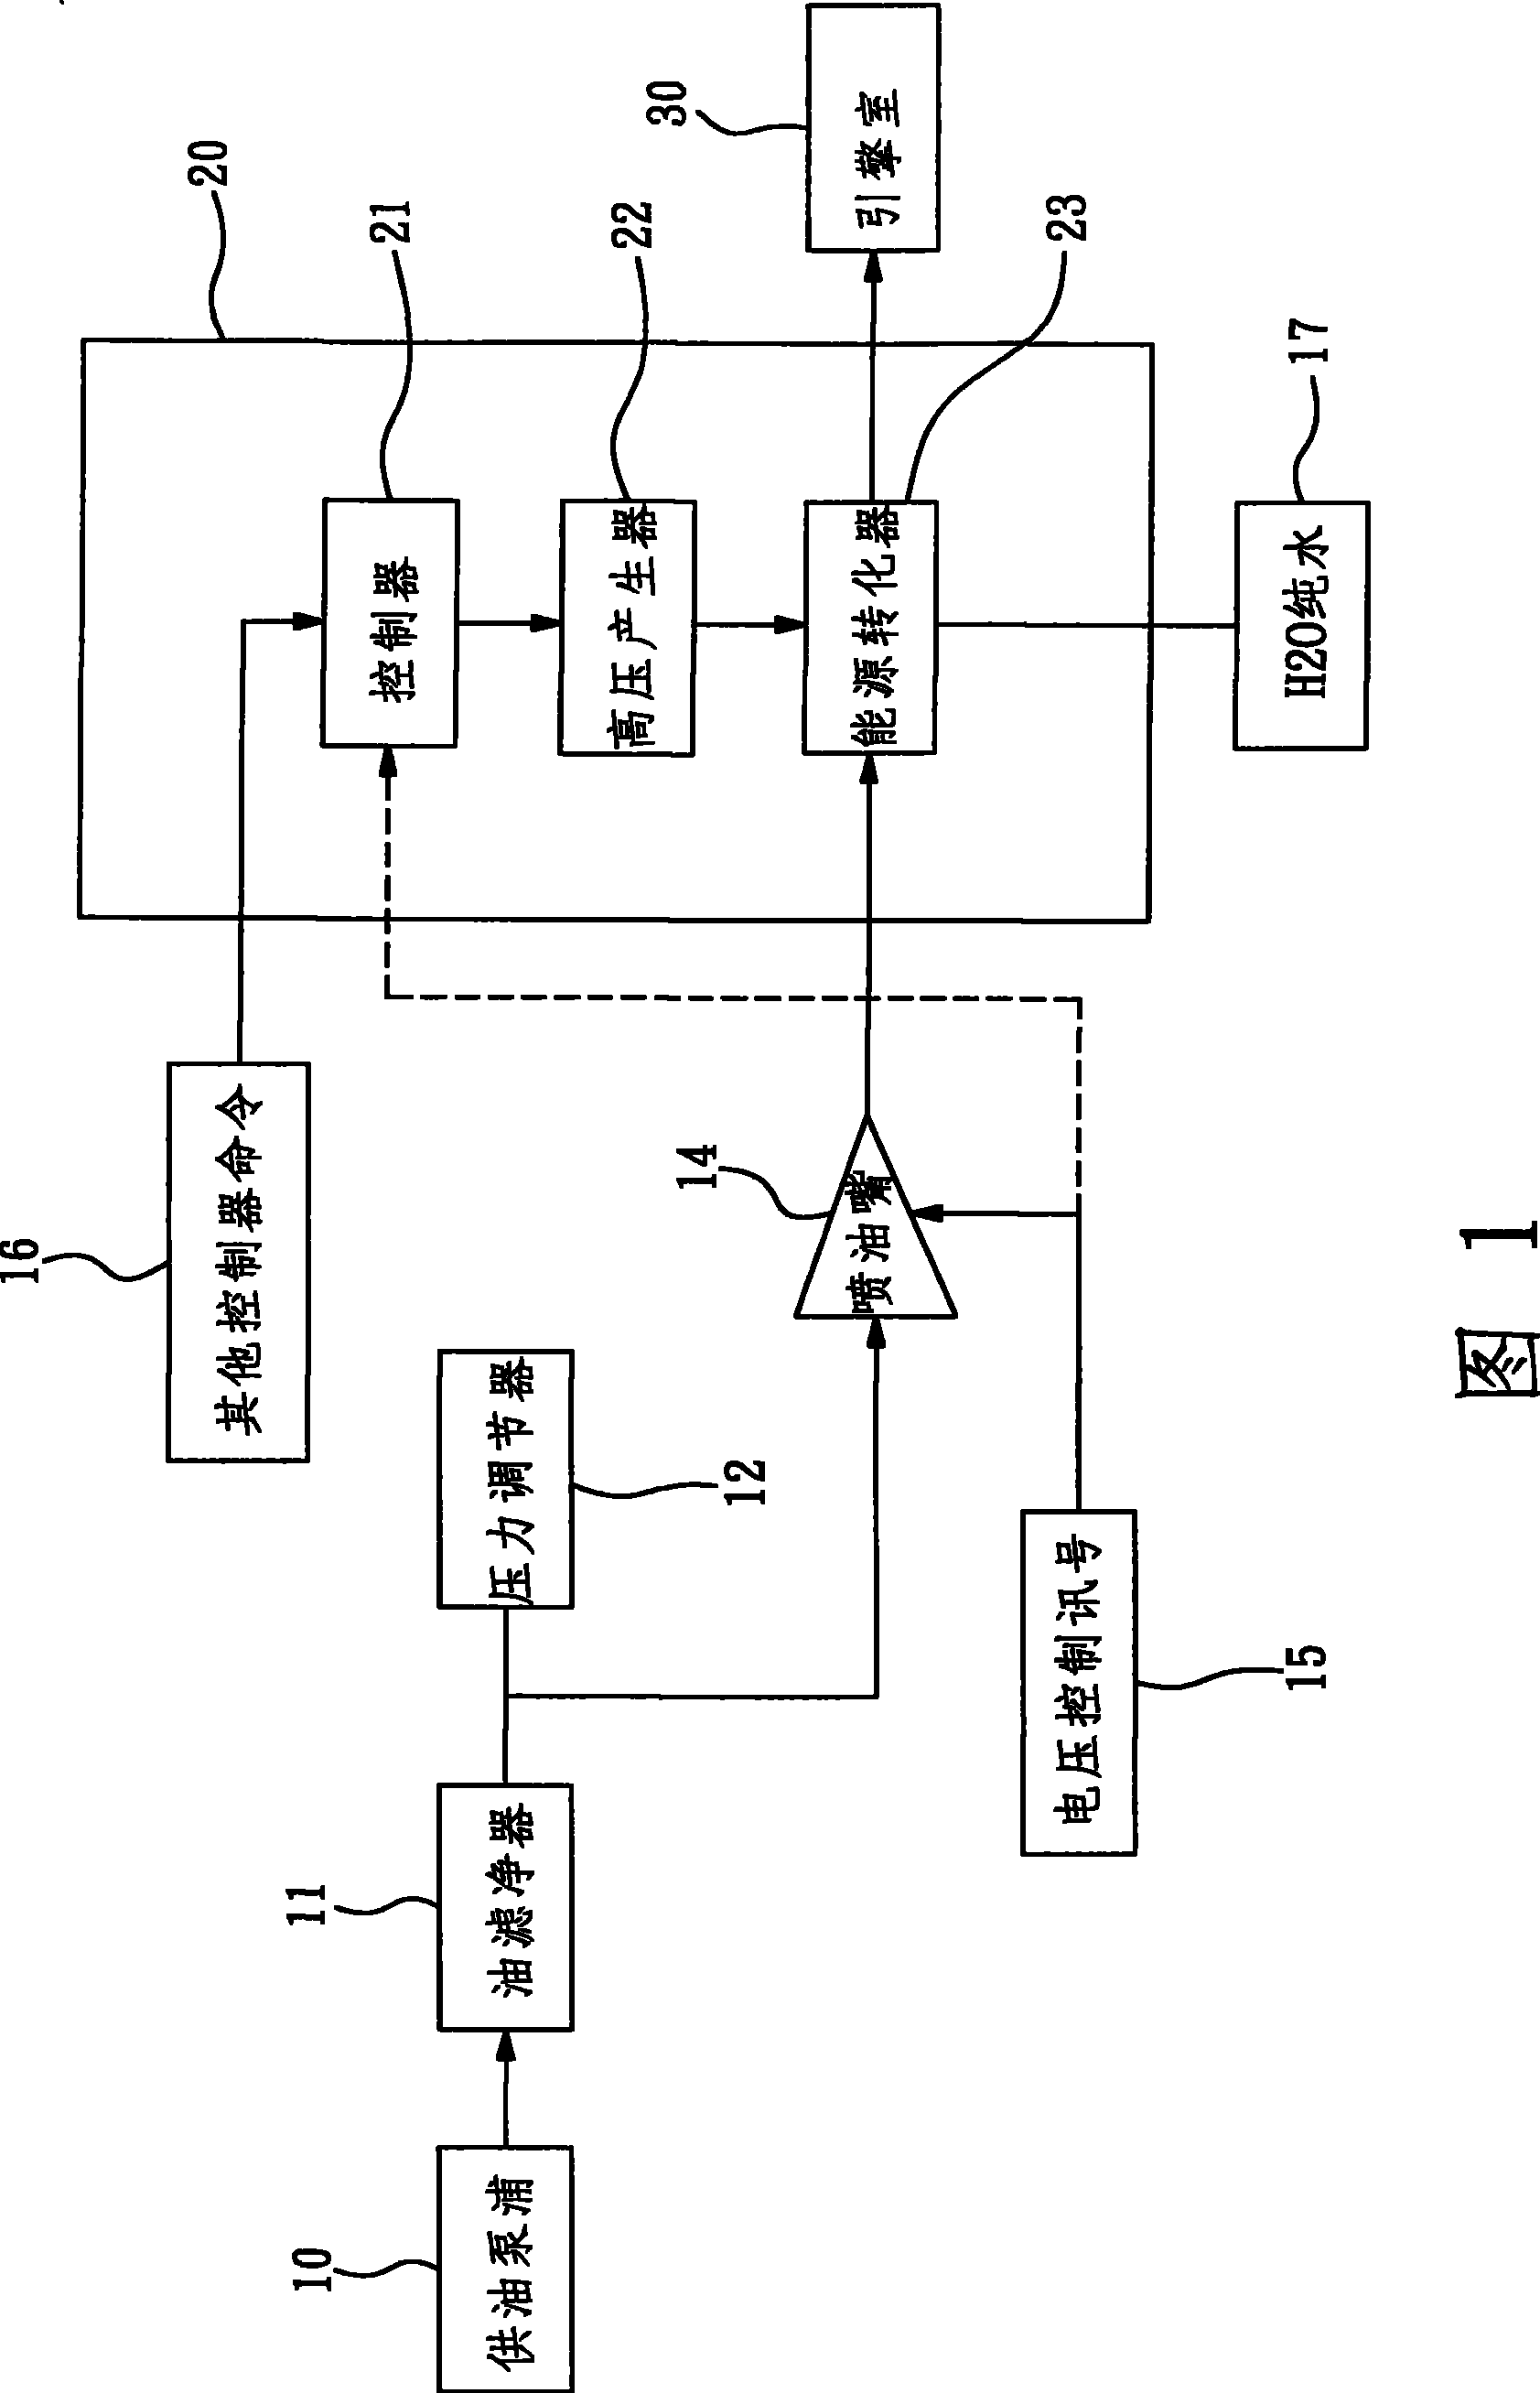 Method and apparatus for engine to convert fuel